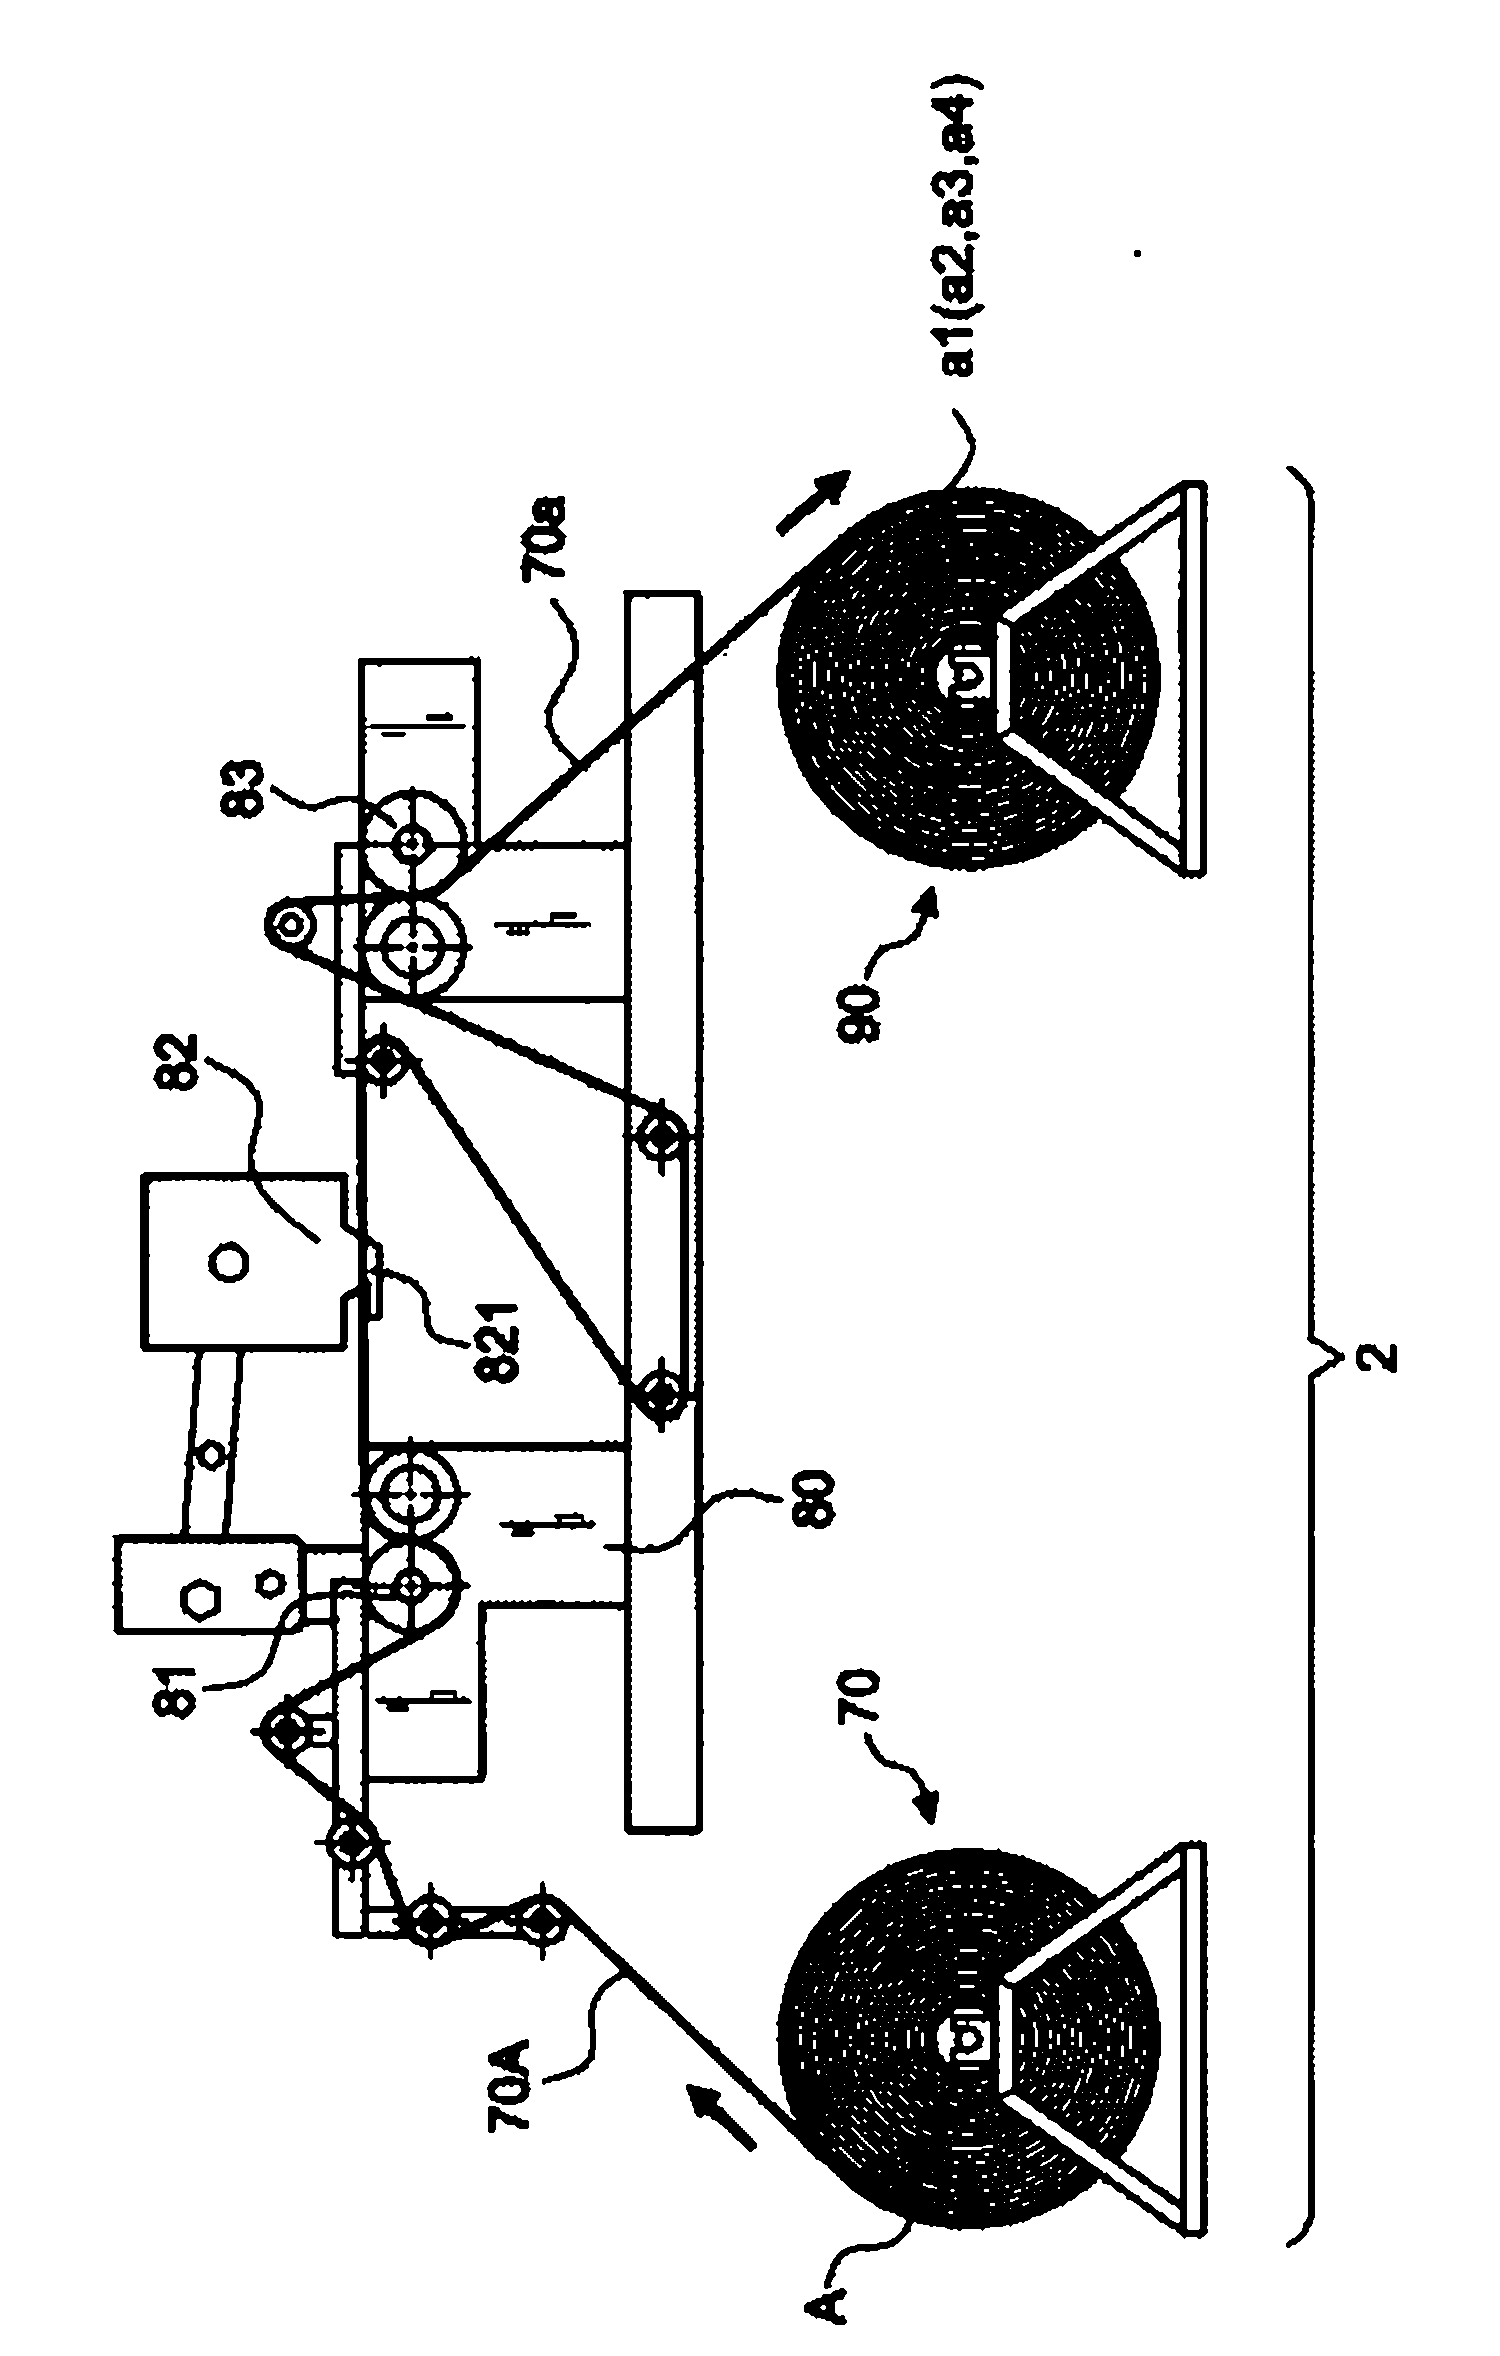 Integrated processing device of in-plant production of surface-coated and modified BOPP (Biaxially Oriented Polypropylene) synthetic paper